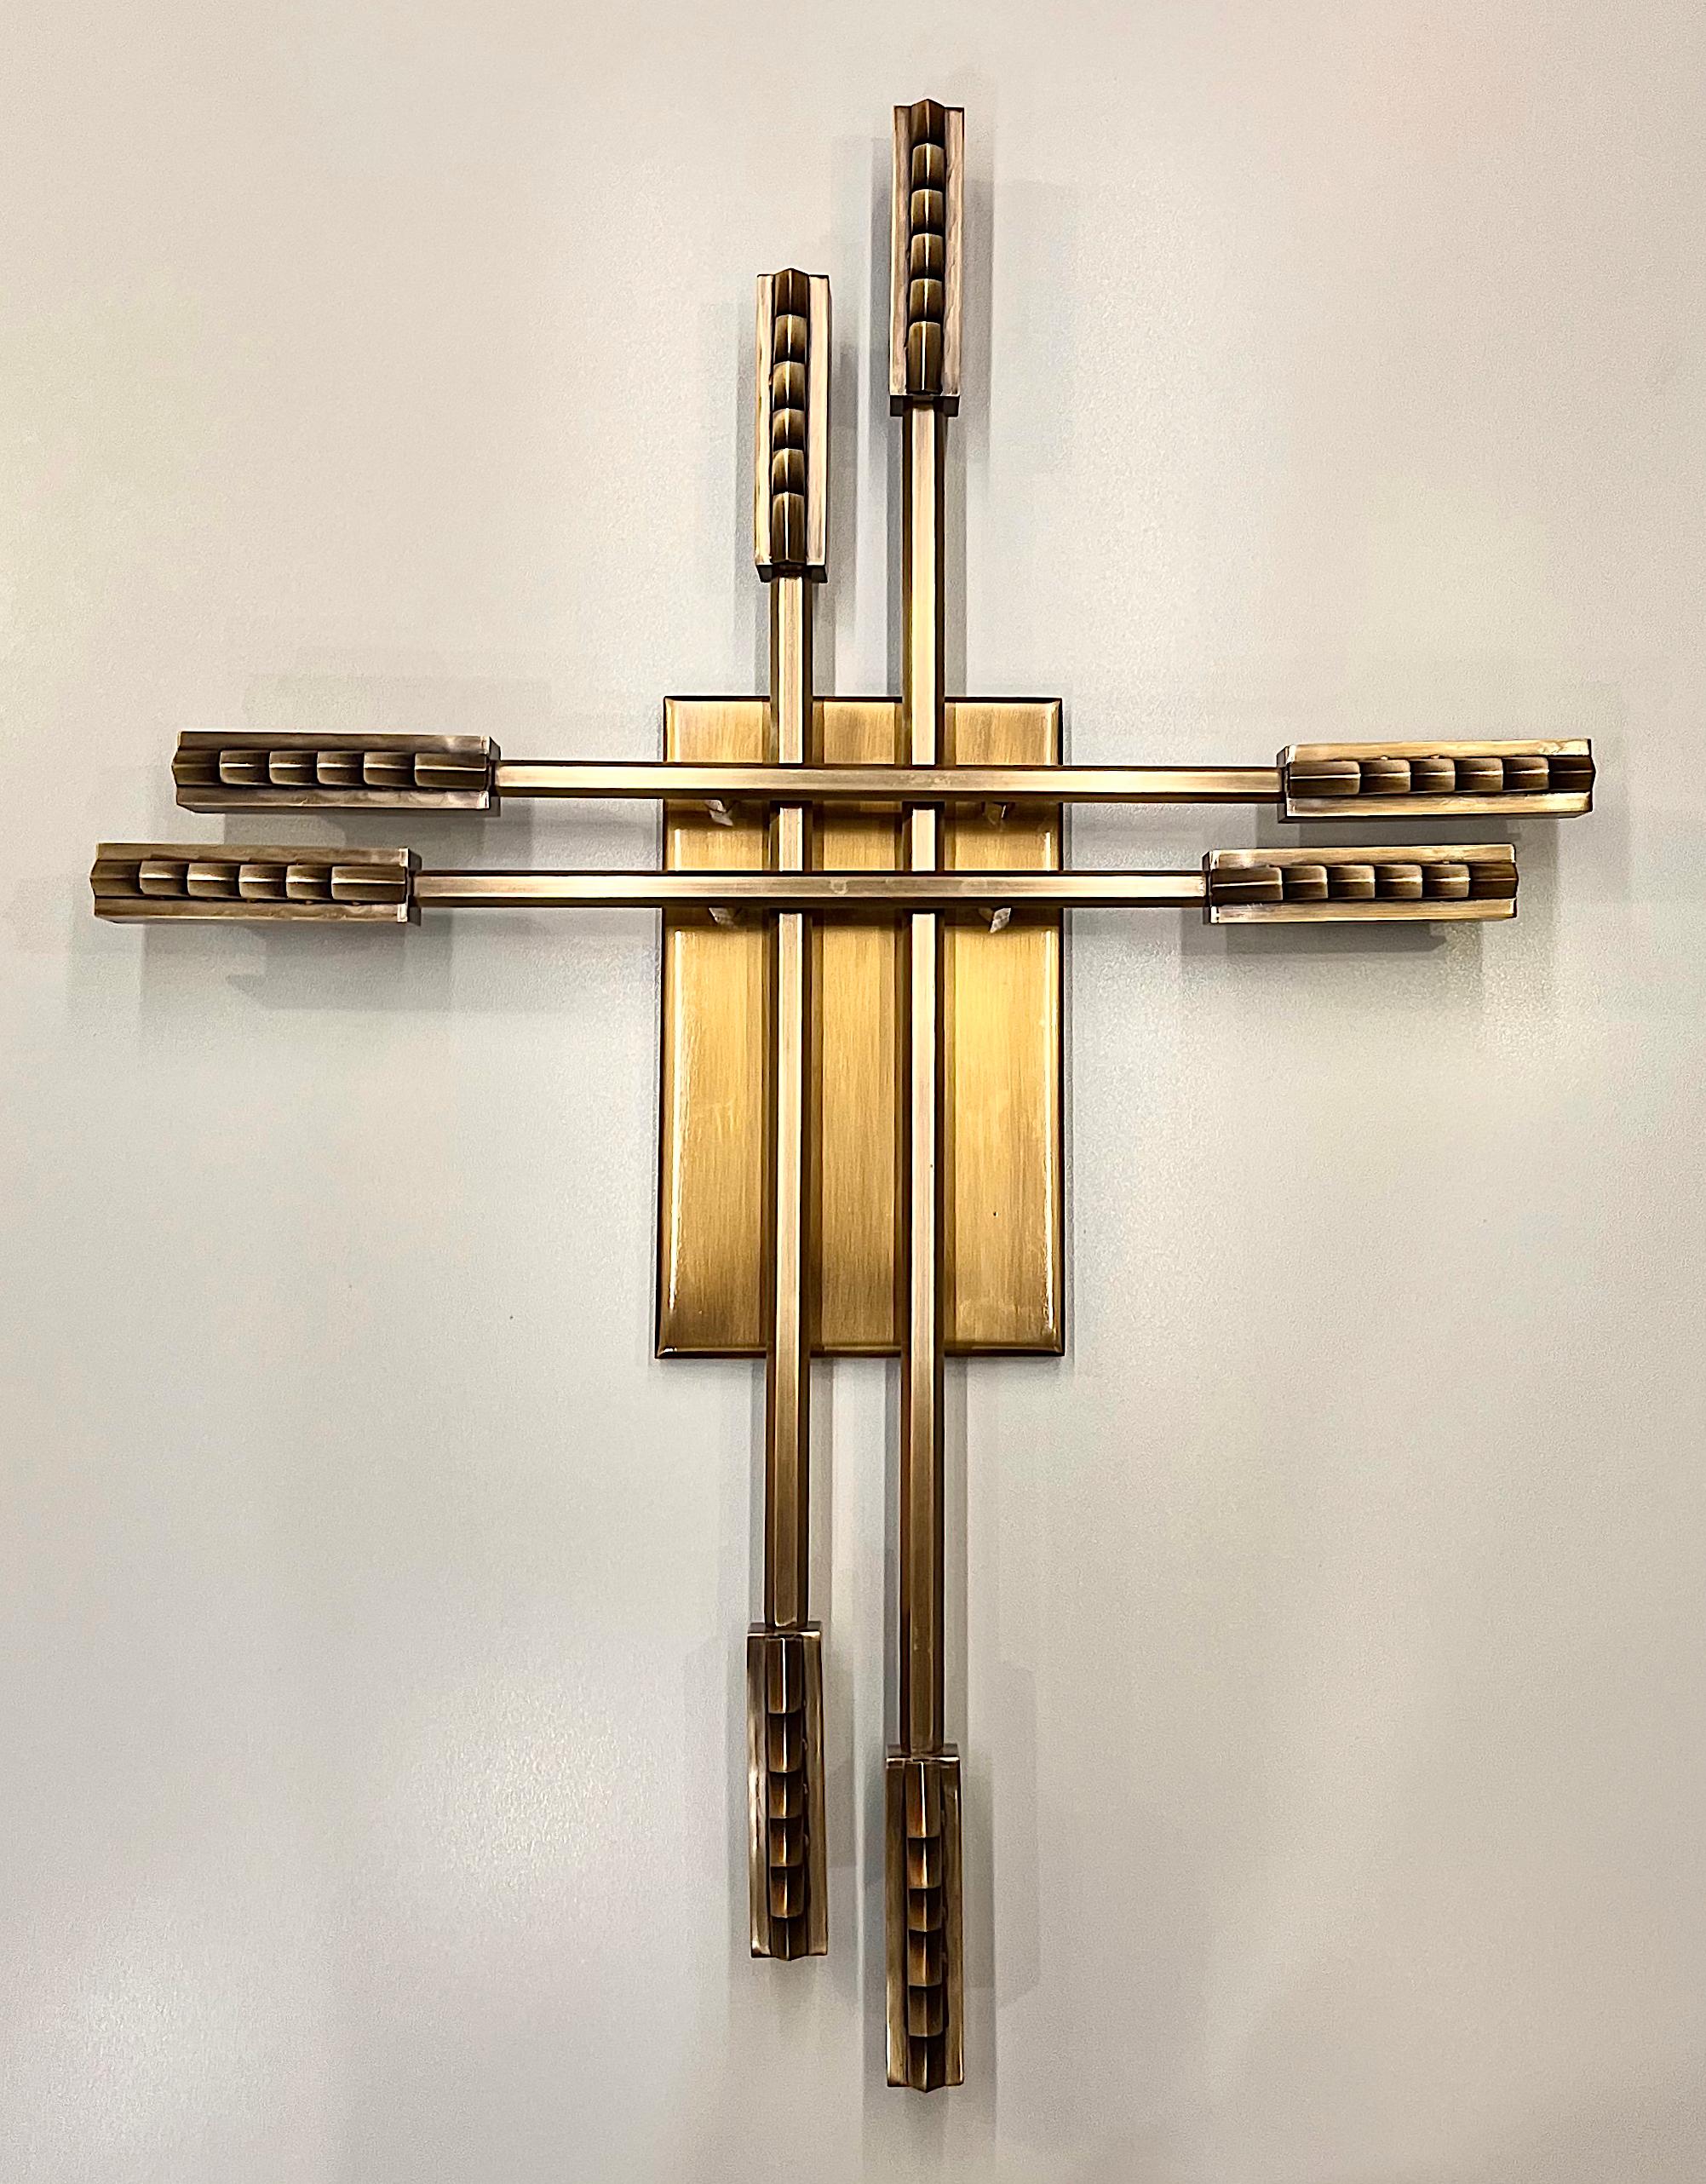 OLBIA brass casting sculptural sconce is a truly magnificent work of art that exudes elegance, sophistication, and unparalleled craftsmanship. Inspired by the intricate patterns found on the surface of shells, this sconce is a true testament to the